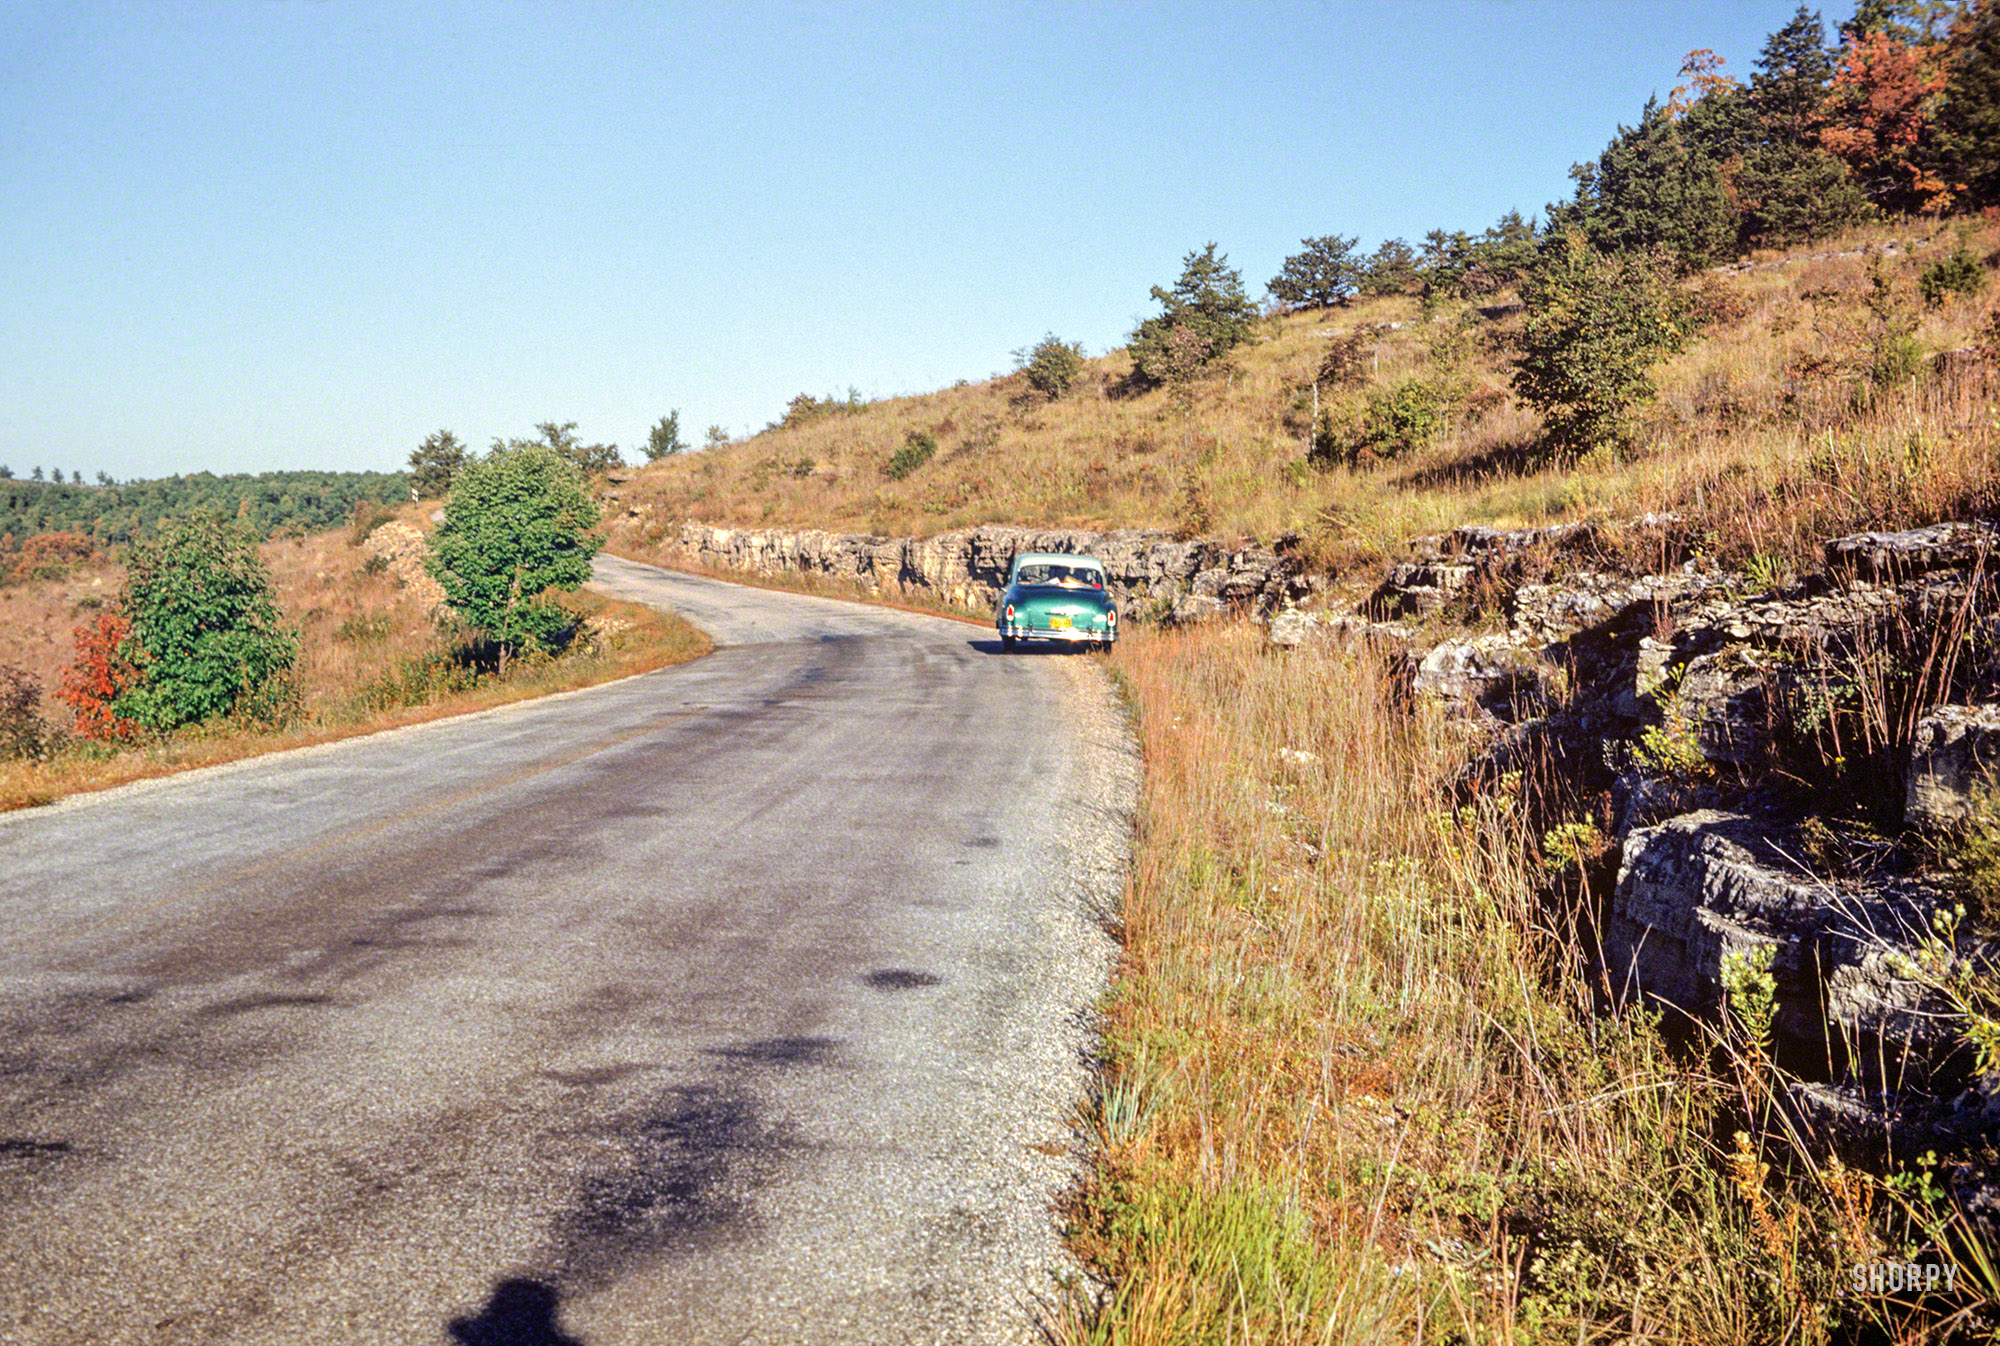 "Shepherd of the Hills Country - 7 Oct 1952." Hubert & Grace's DeSoto has a starring role in the latest "away" episode of Minnesota Kodachromes, parked somewhere near Branson, Missouri. Color slide by Hubert Tuttle. View full size.